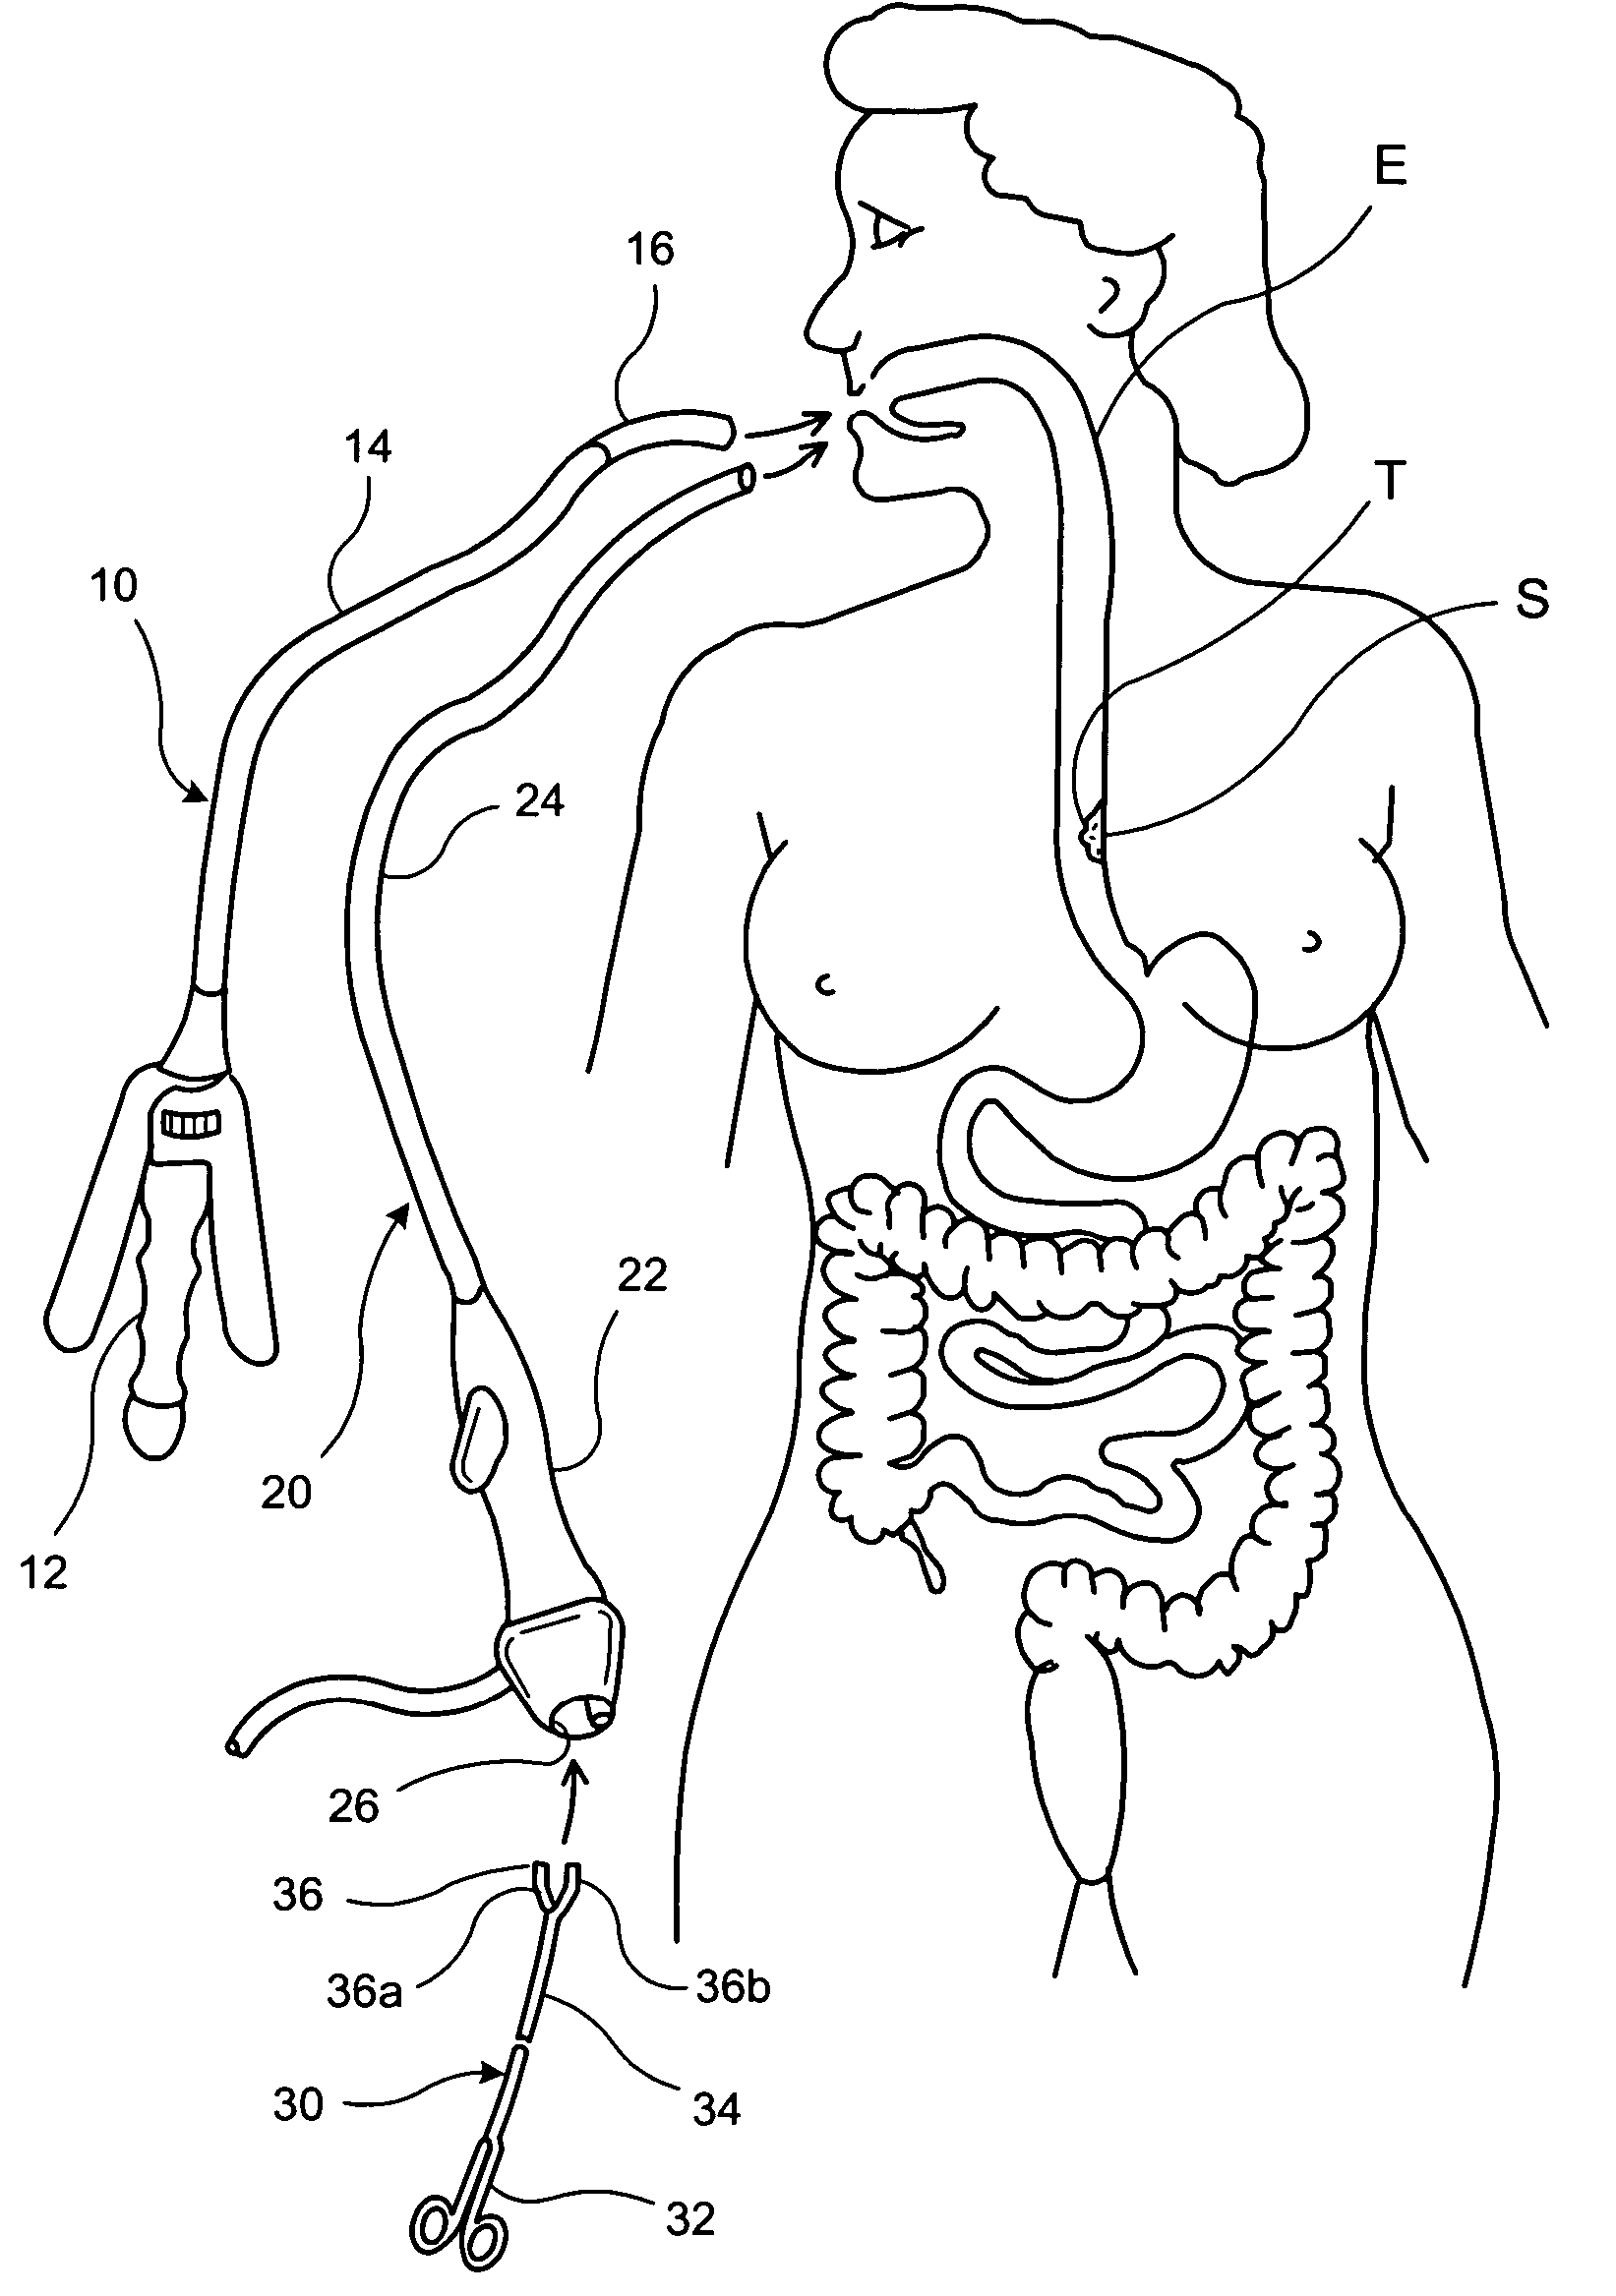 Apparatus and method for resectioning gastro-esophageal tissue